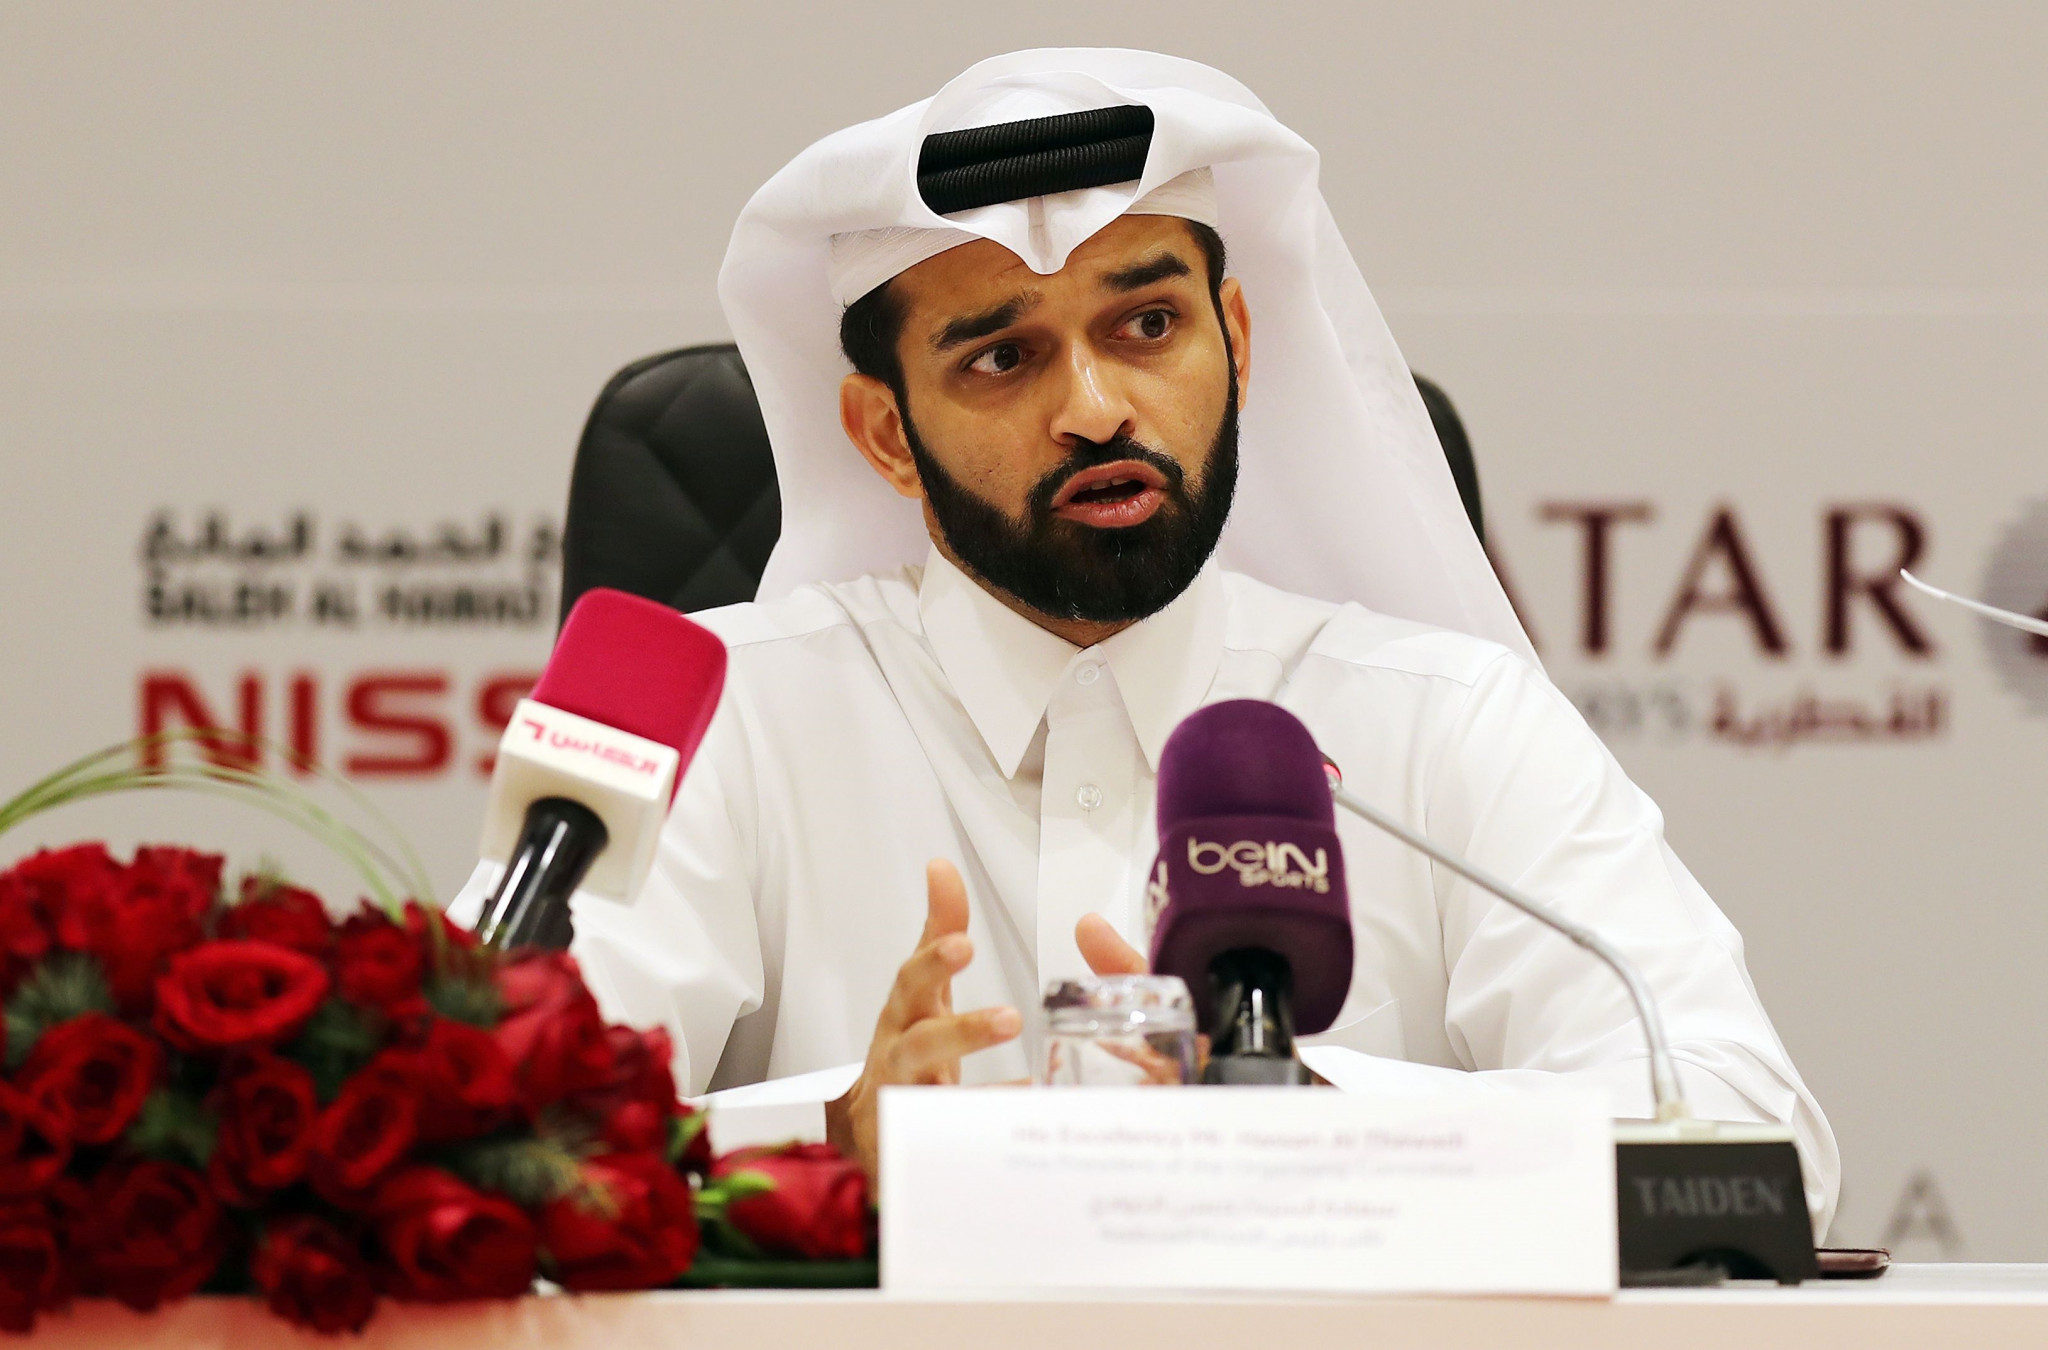 Hassan Al-Thawadi, secretary general of the Supreme Committee for Delivery and Legacy at Qatar 2022, is among the speakers confirmed for the business event in Birmingham ©Getty Images